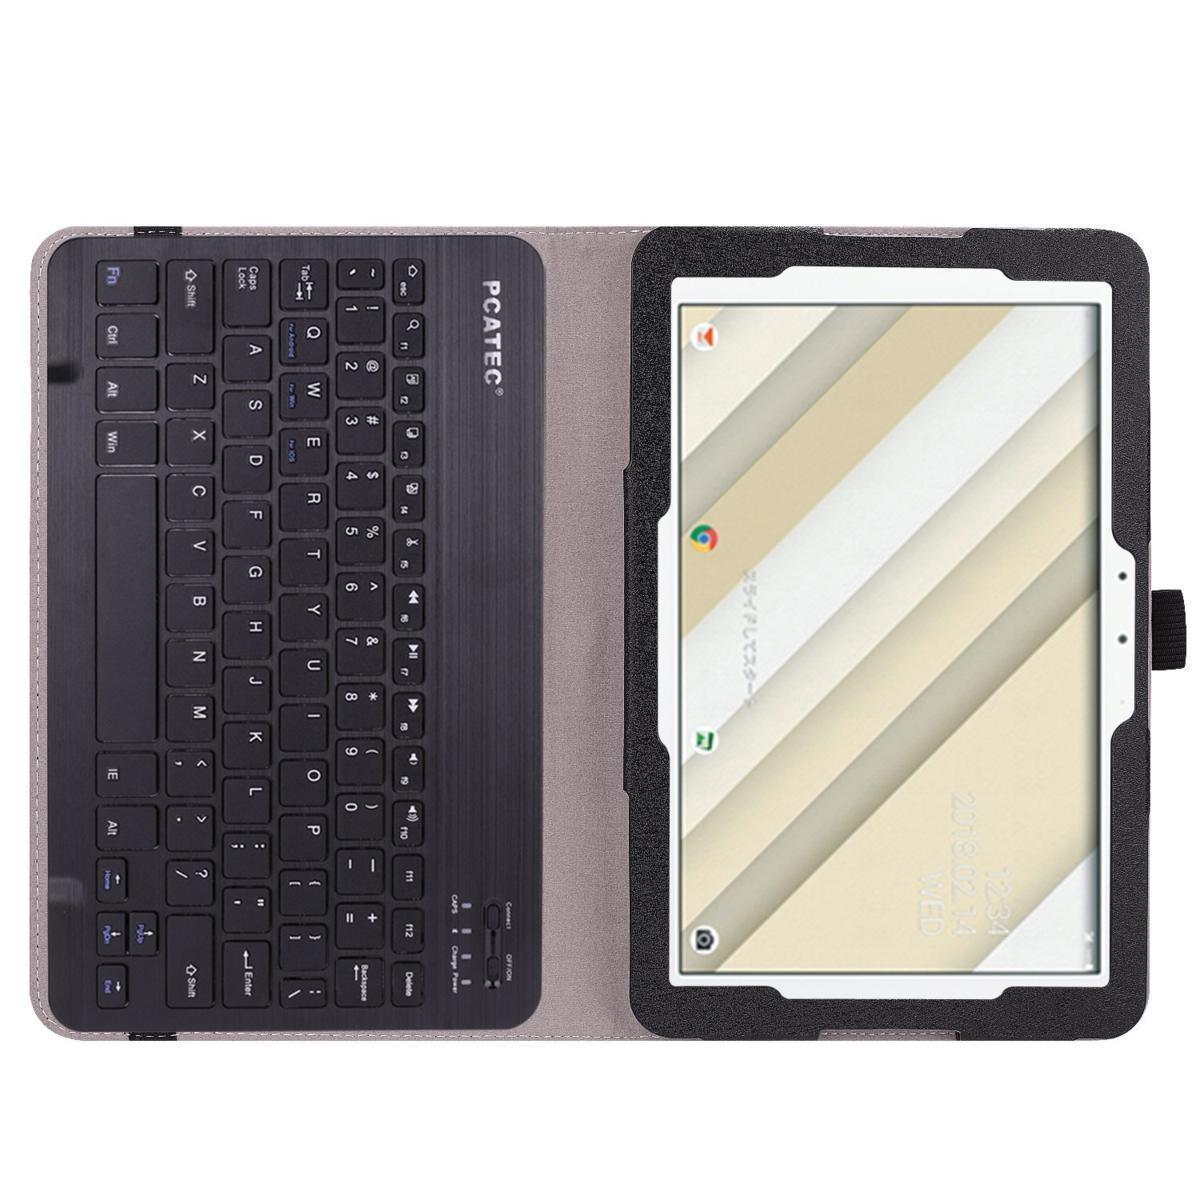 [ free shipping ]au Qua tab QZ10 KYT33 exclusive use leather case attaching Bluetooth keyboard band opening and closing type case US arrangement cosmos Milky Way 